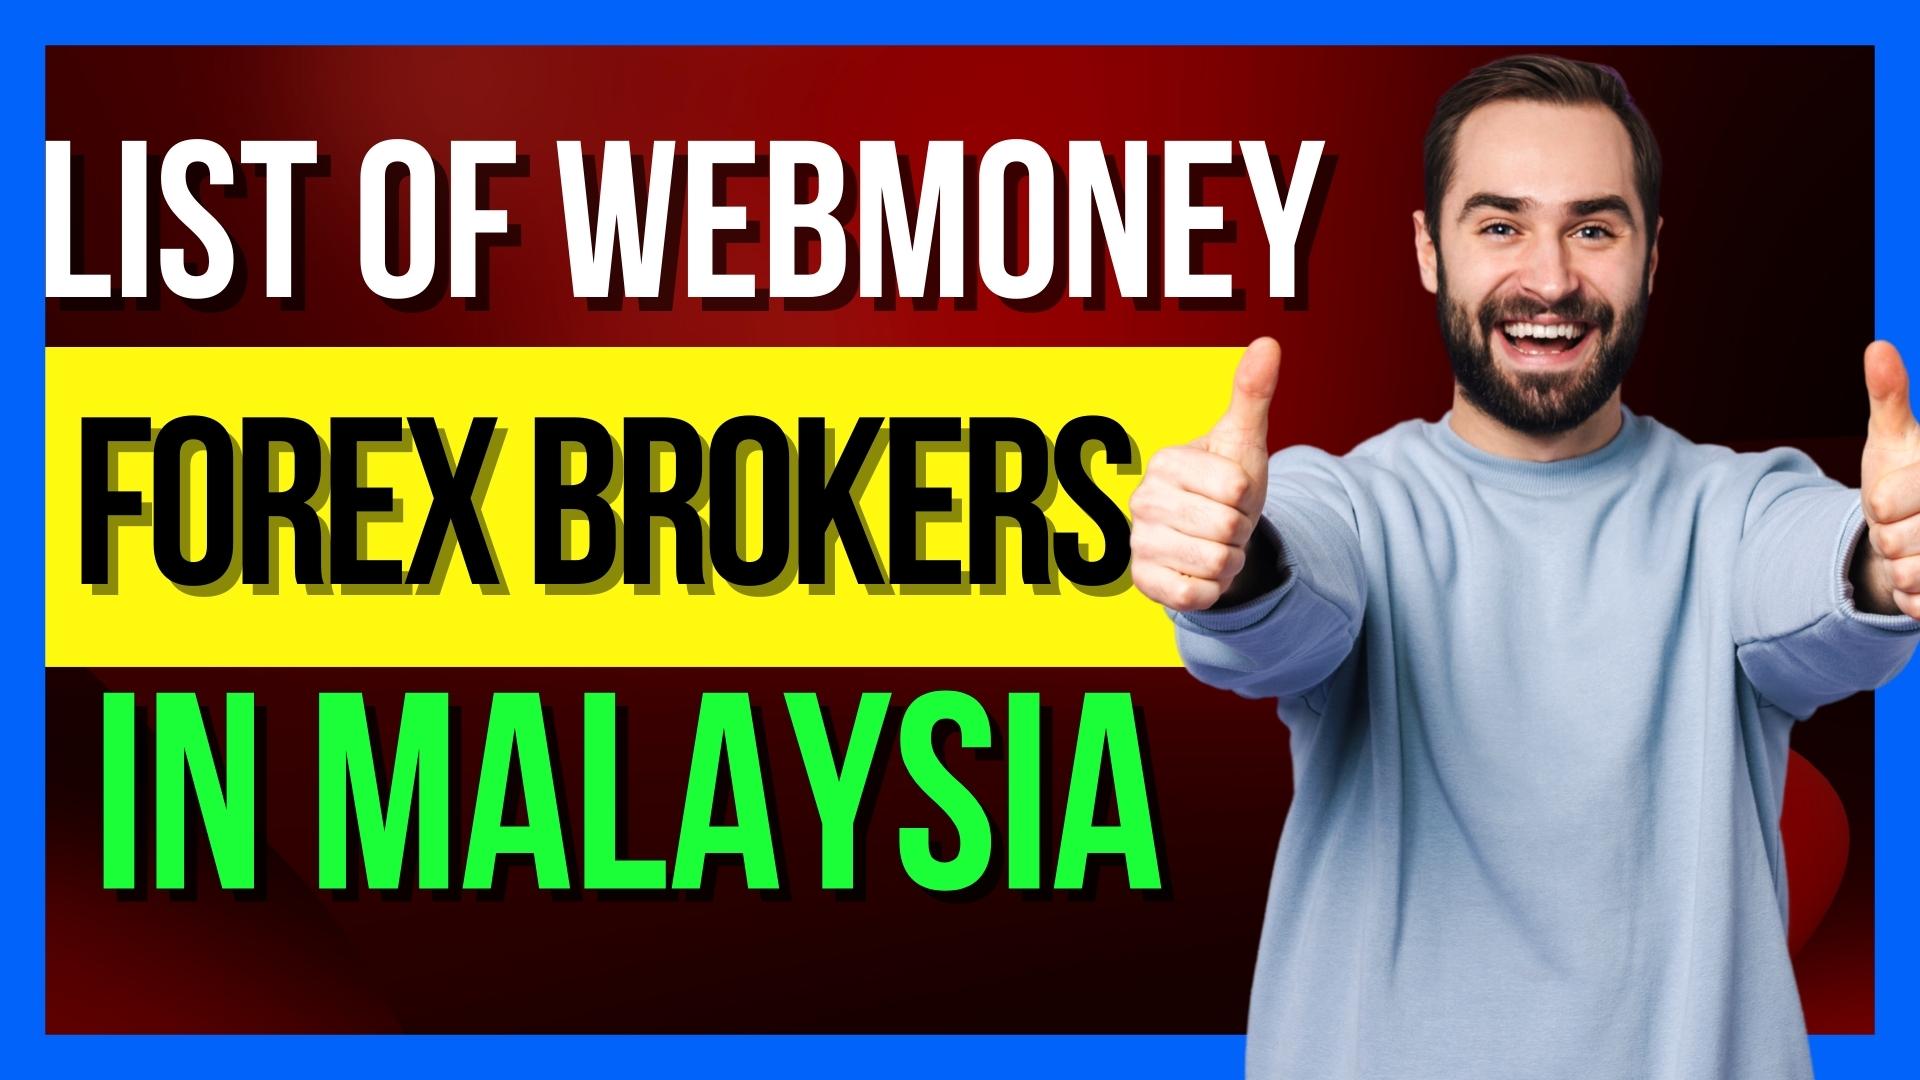 List Of Webmoney Forex Brokers In Malaysia - Malaysia Forex Trading 💸